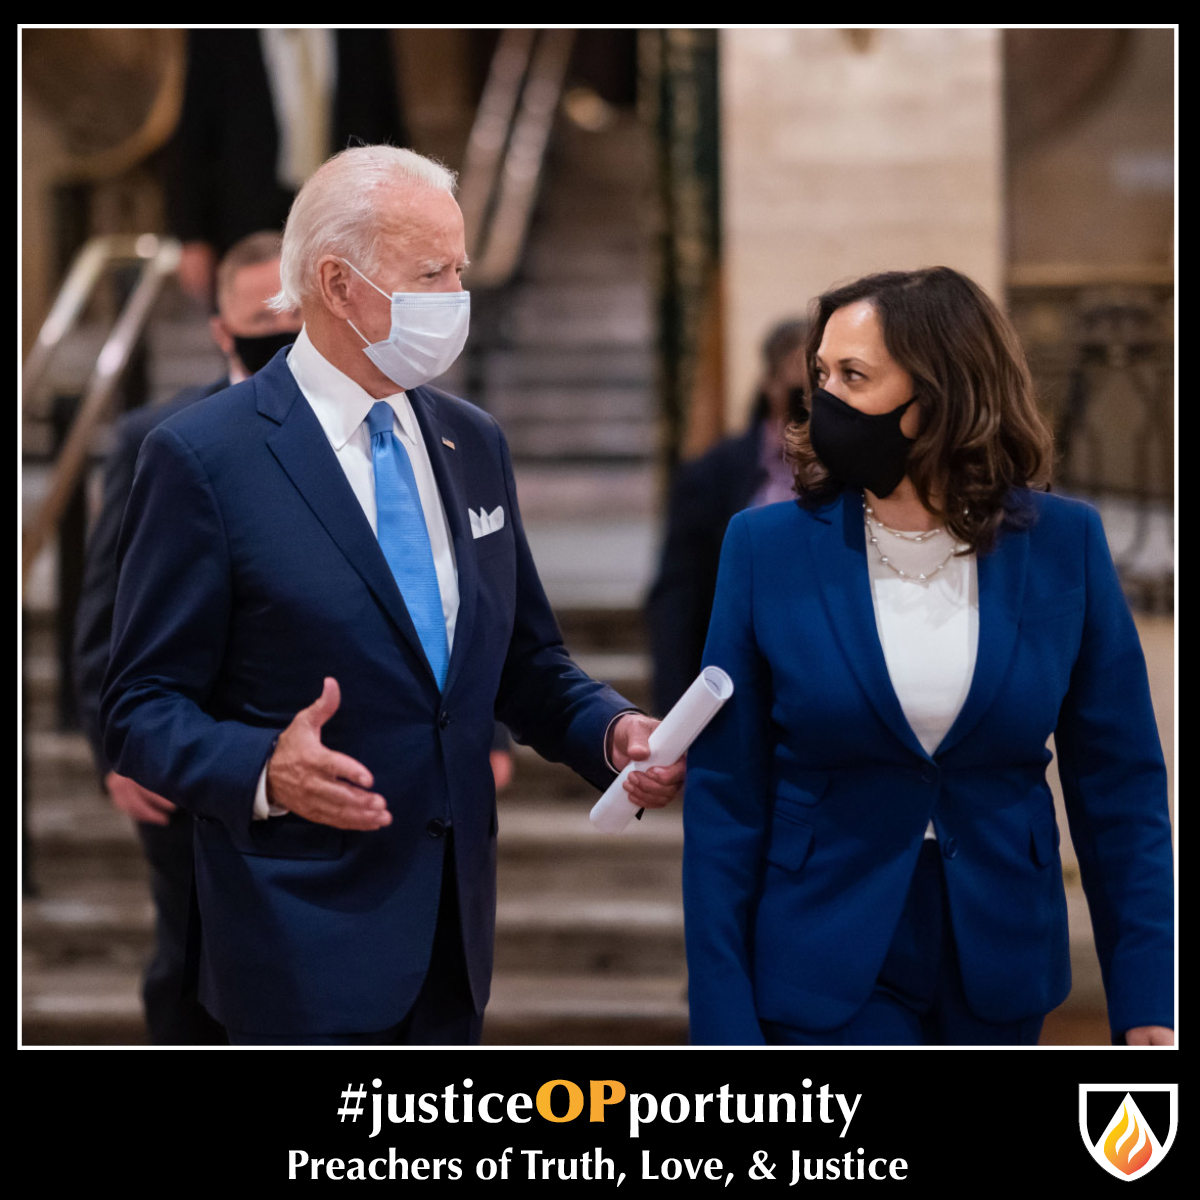 #justiceOPportunity Thursday—January 21, 2021